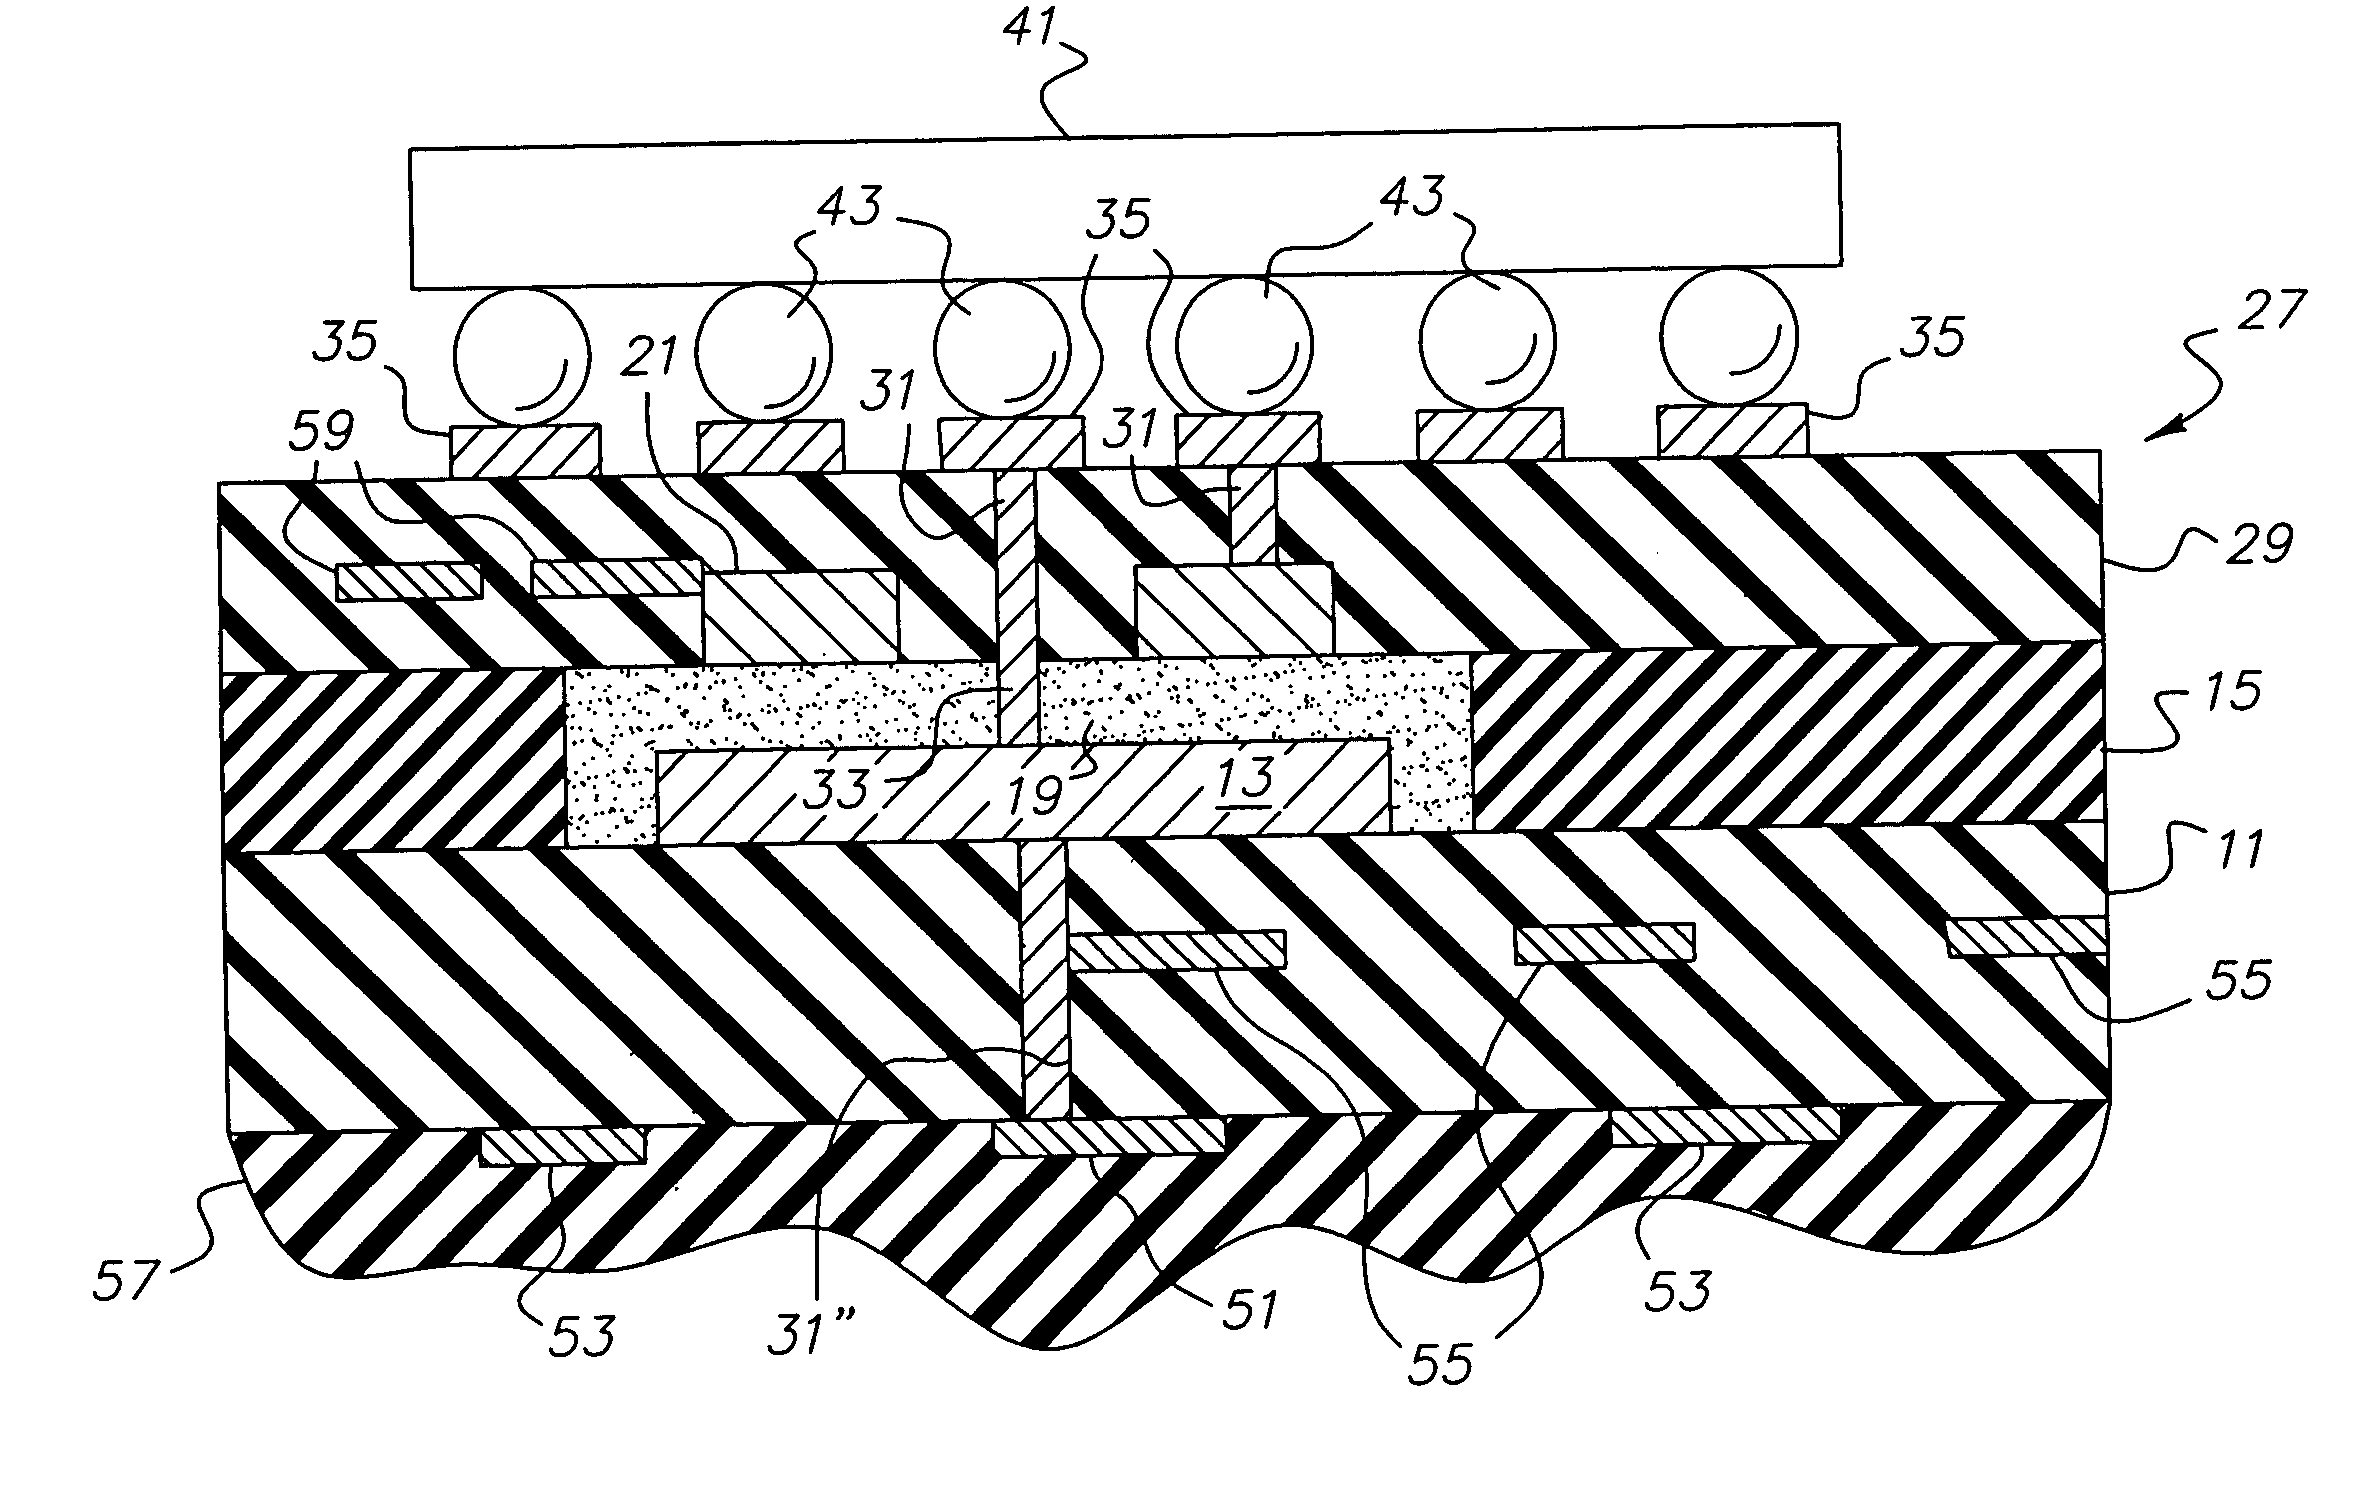 Capacitor material for use in circuitized substrates, circuitized substrate utilizing same, method of making said circuitized substrate, and information handling system utilizing said circuitized substrate